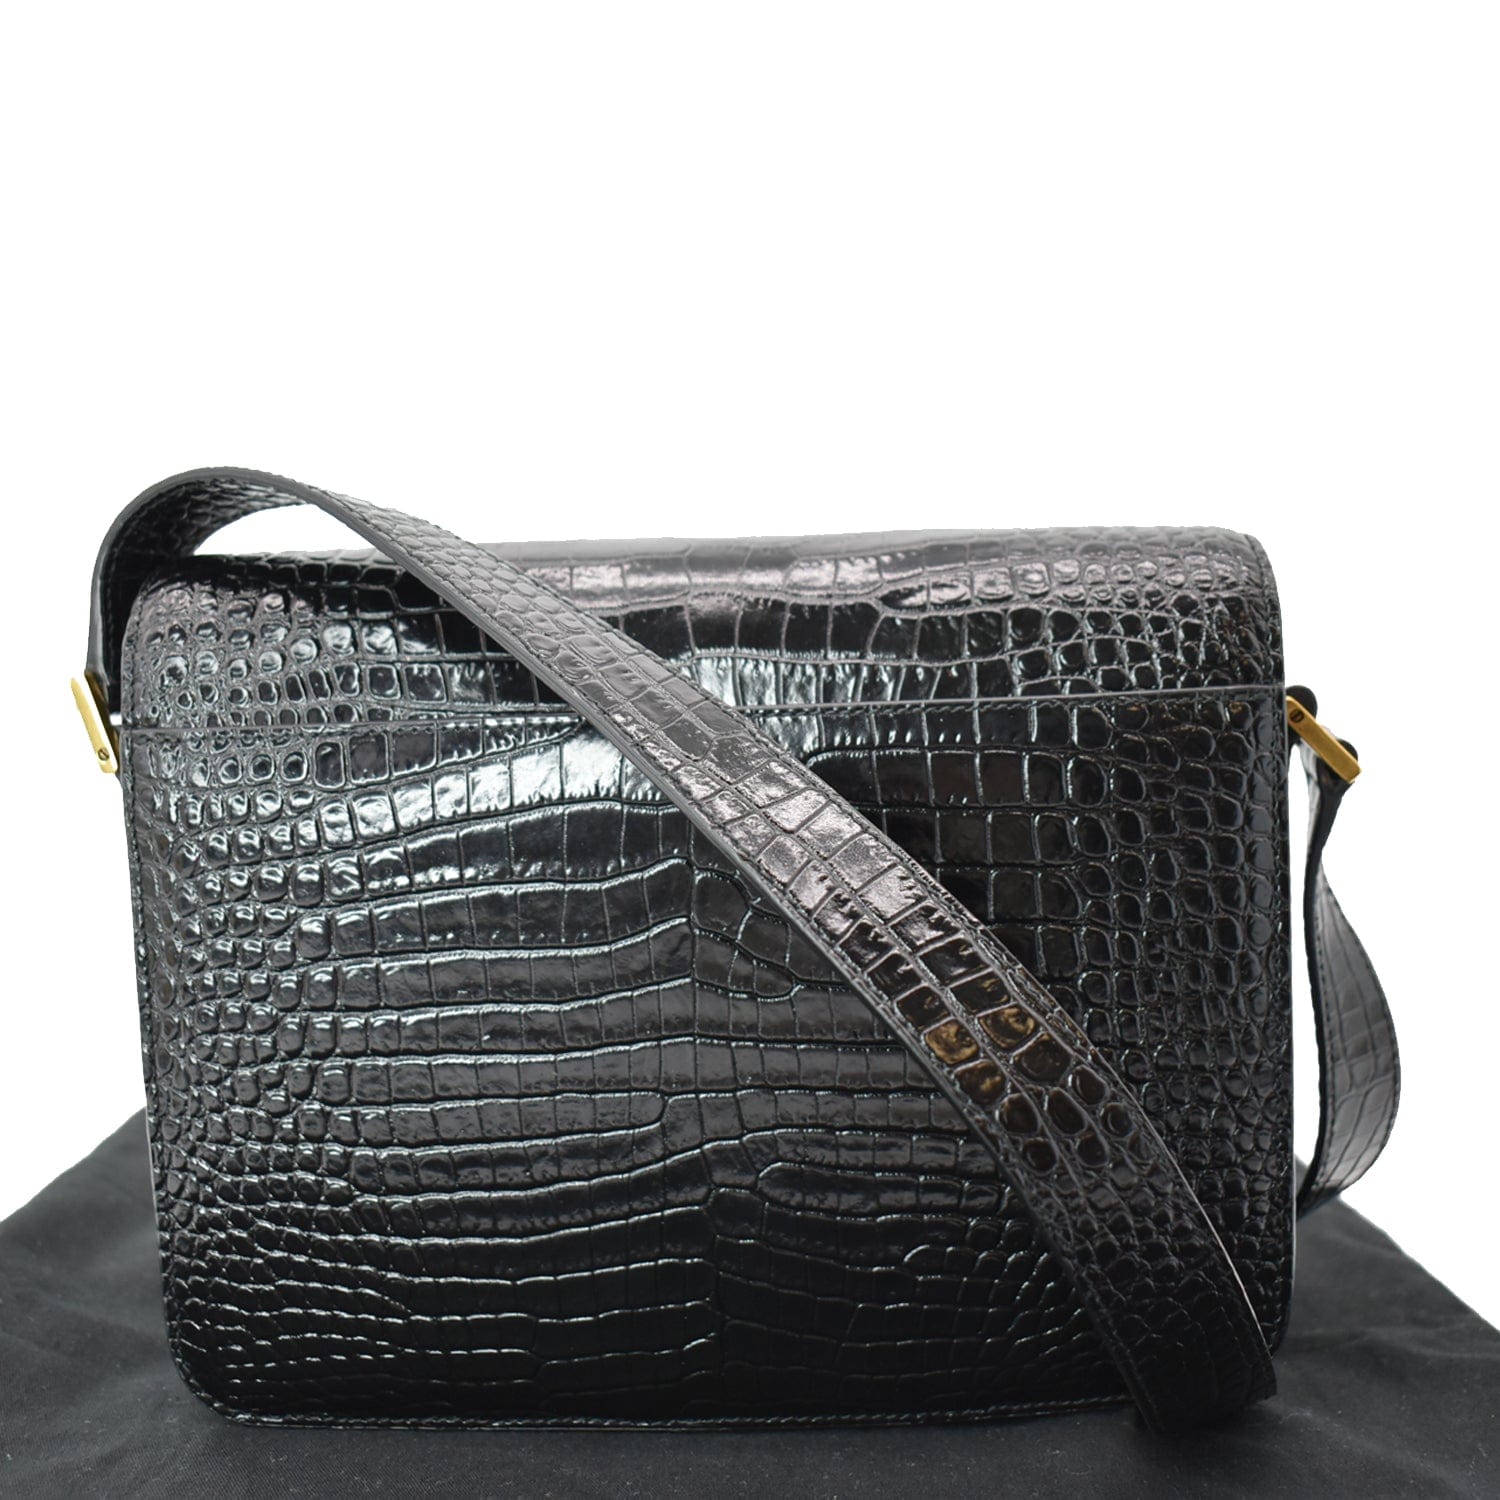 Sold at Auction: YVES SAINT LAURENT 'BESACE SADDLE' CROSSBODY BAG